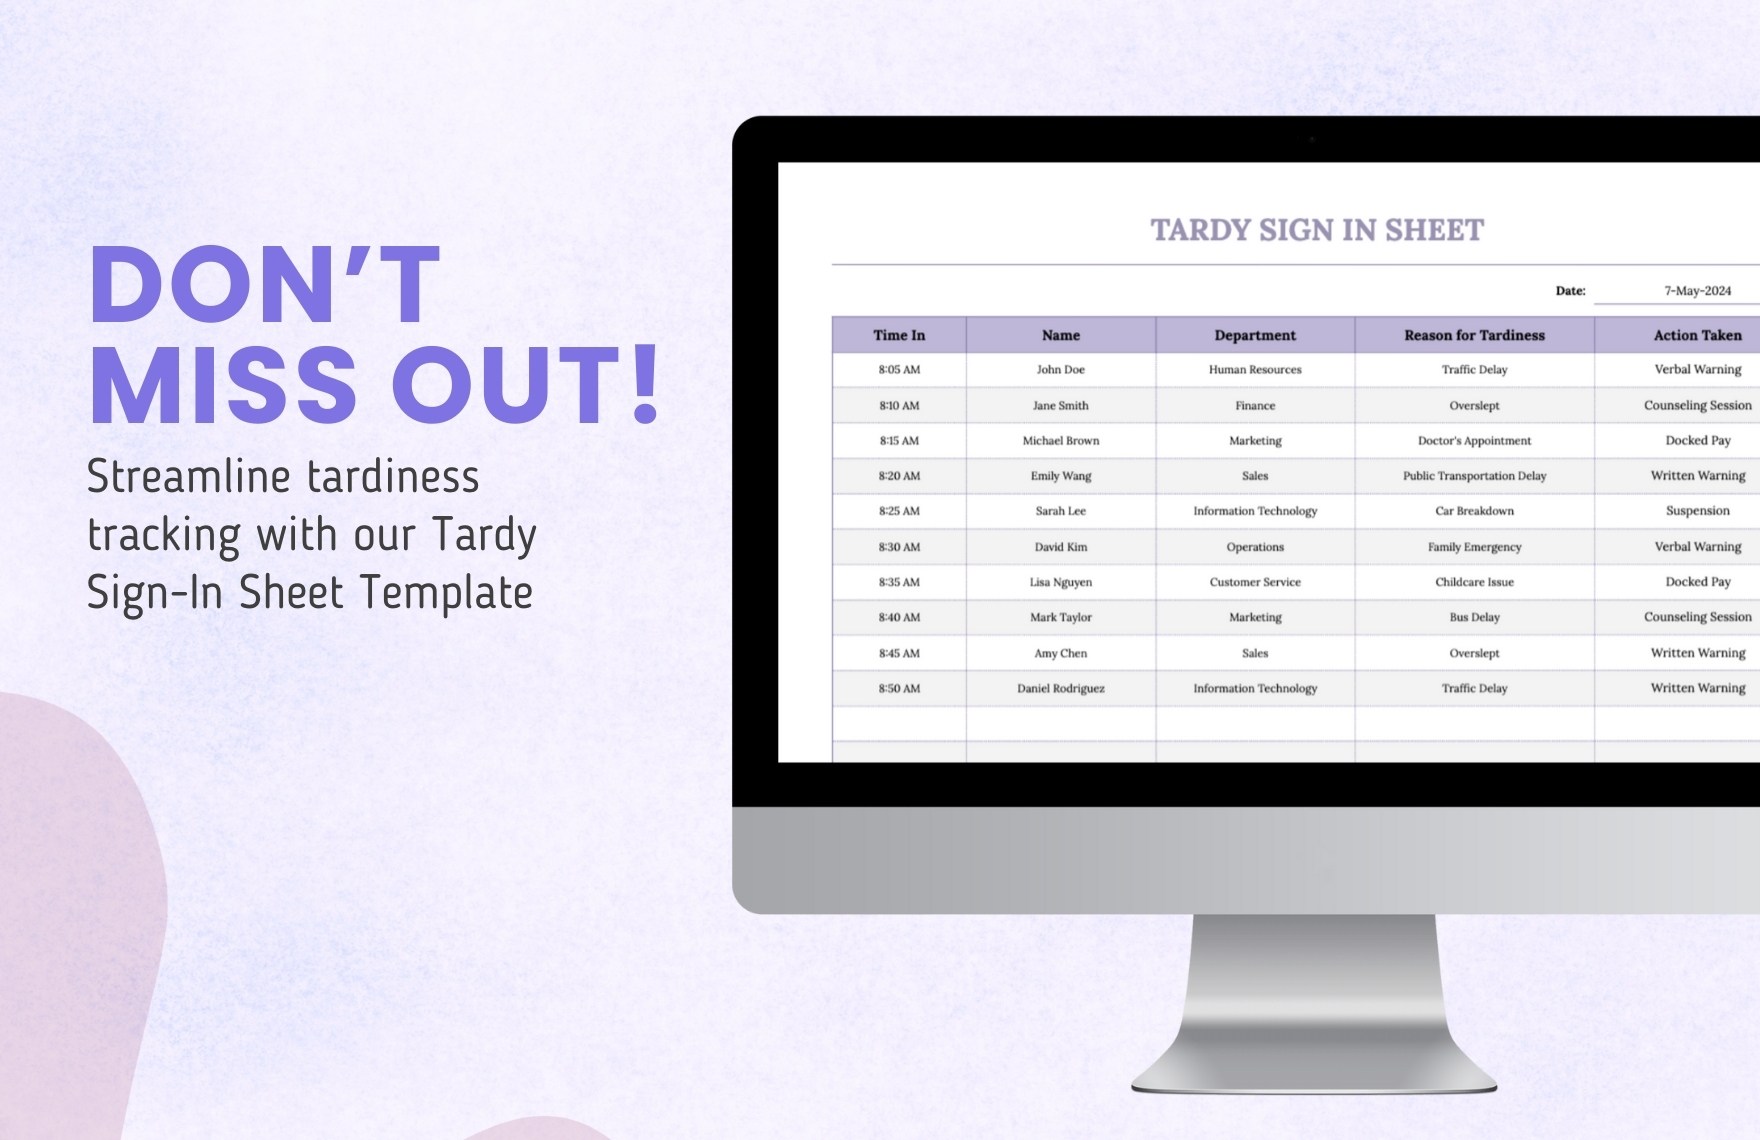 Tardy Sign in Sheet Template